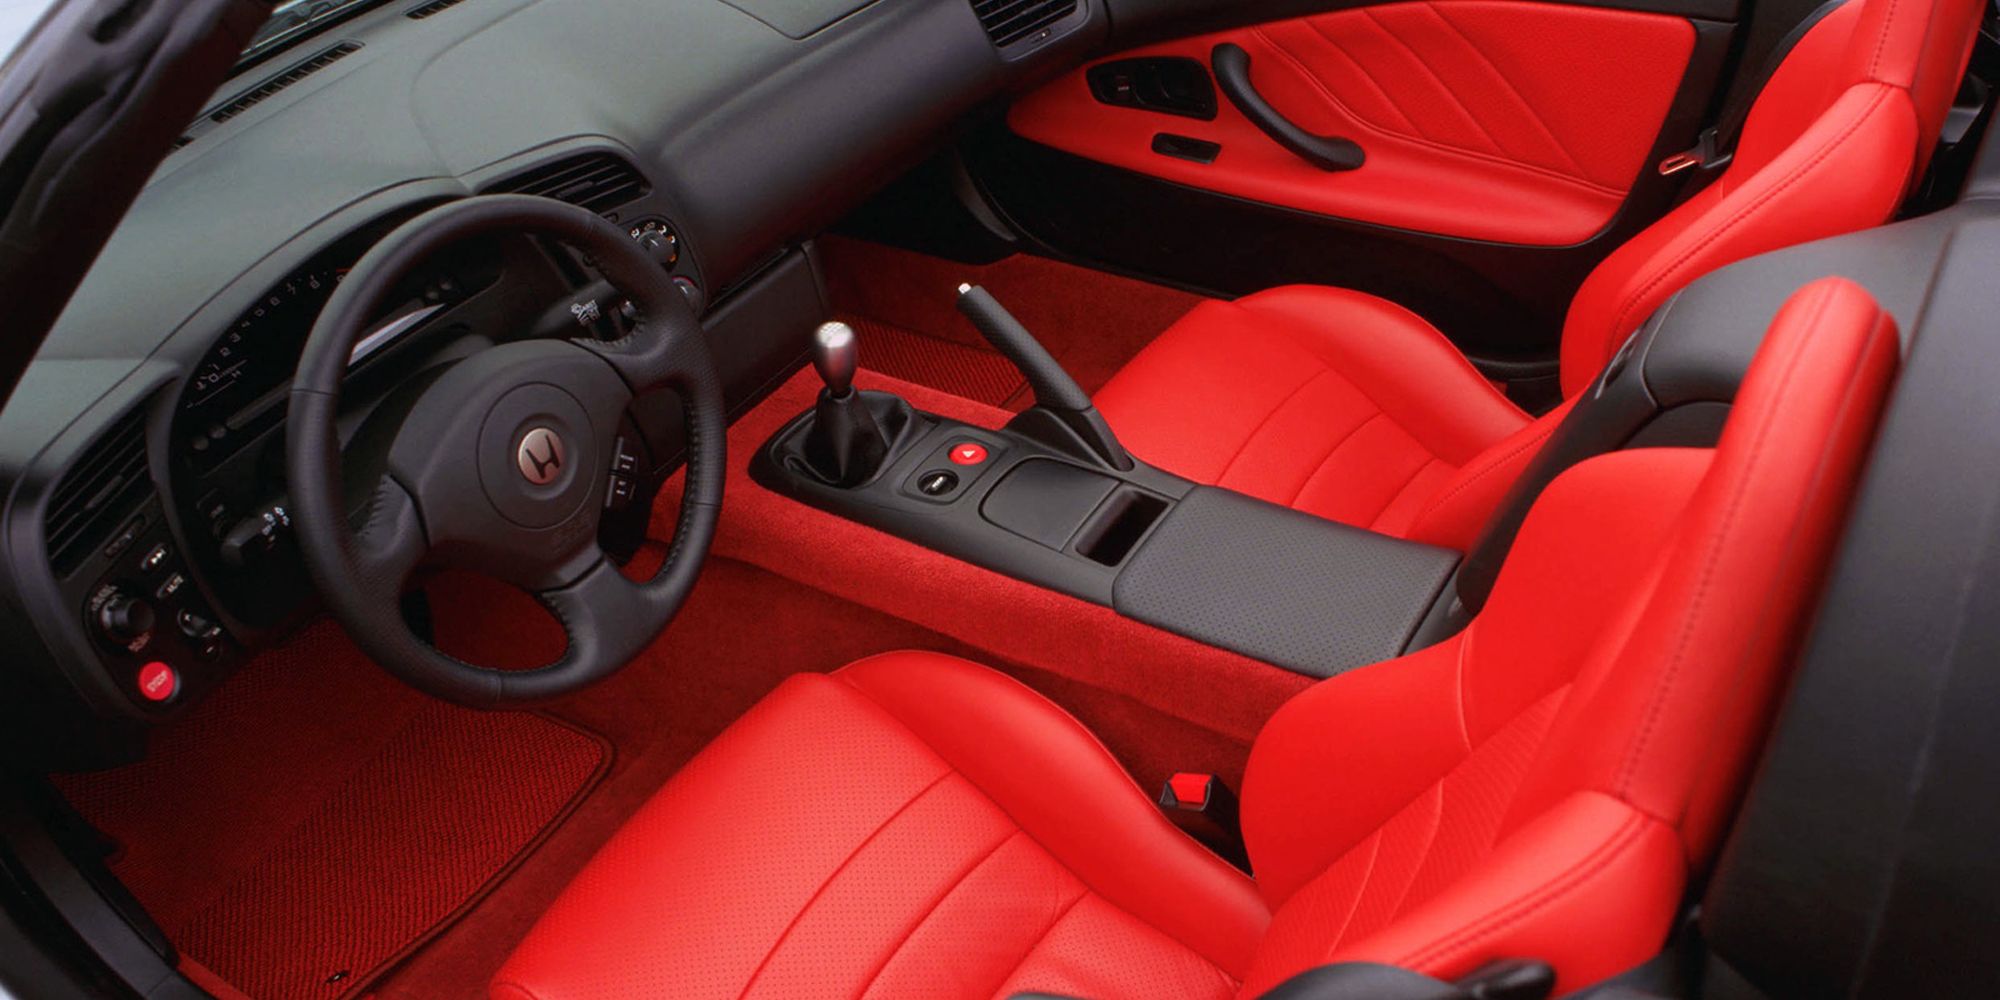 The interior of the S2000 in red